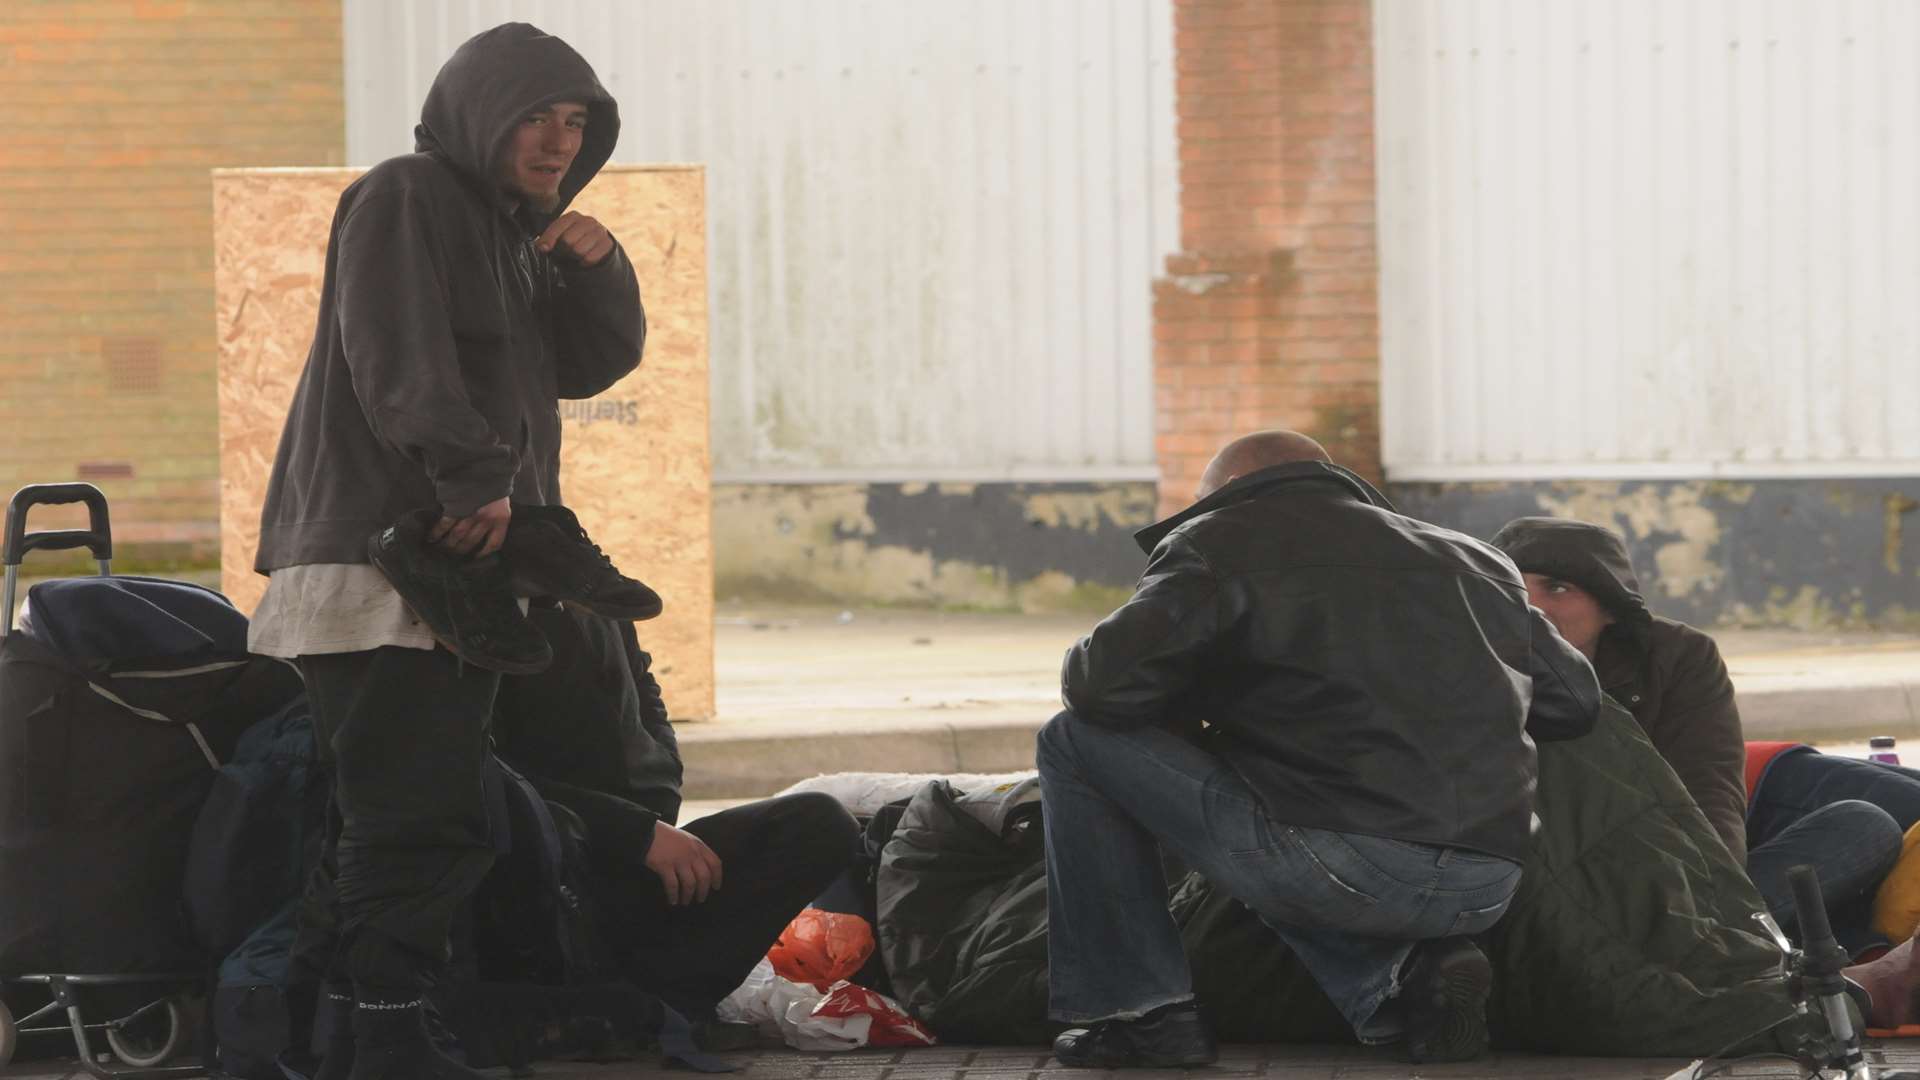 Homelessness is prevalent in many parts of Kent